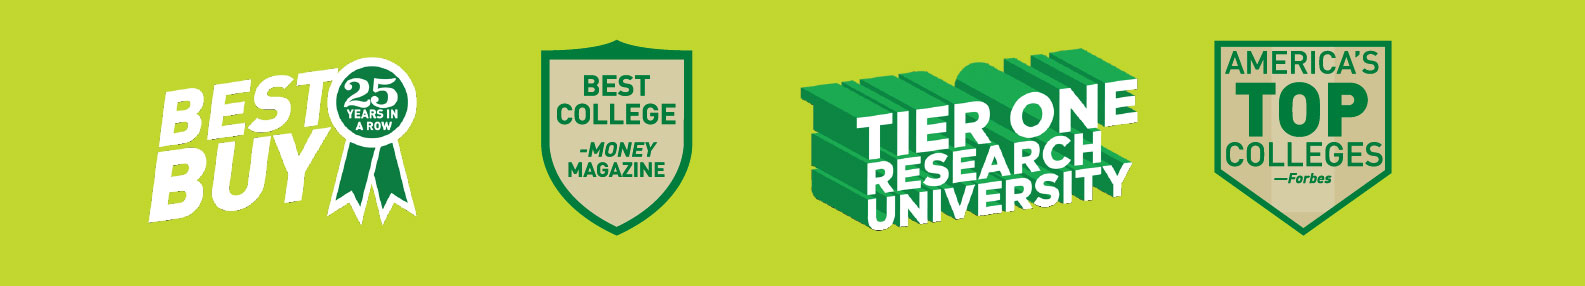 Tier 1 research university; Best Buy 25 years in a row; Best college by Money Magazine; America's Top Colleges by Forbes